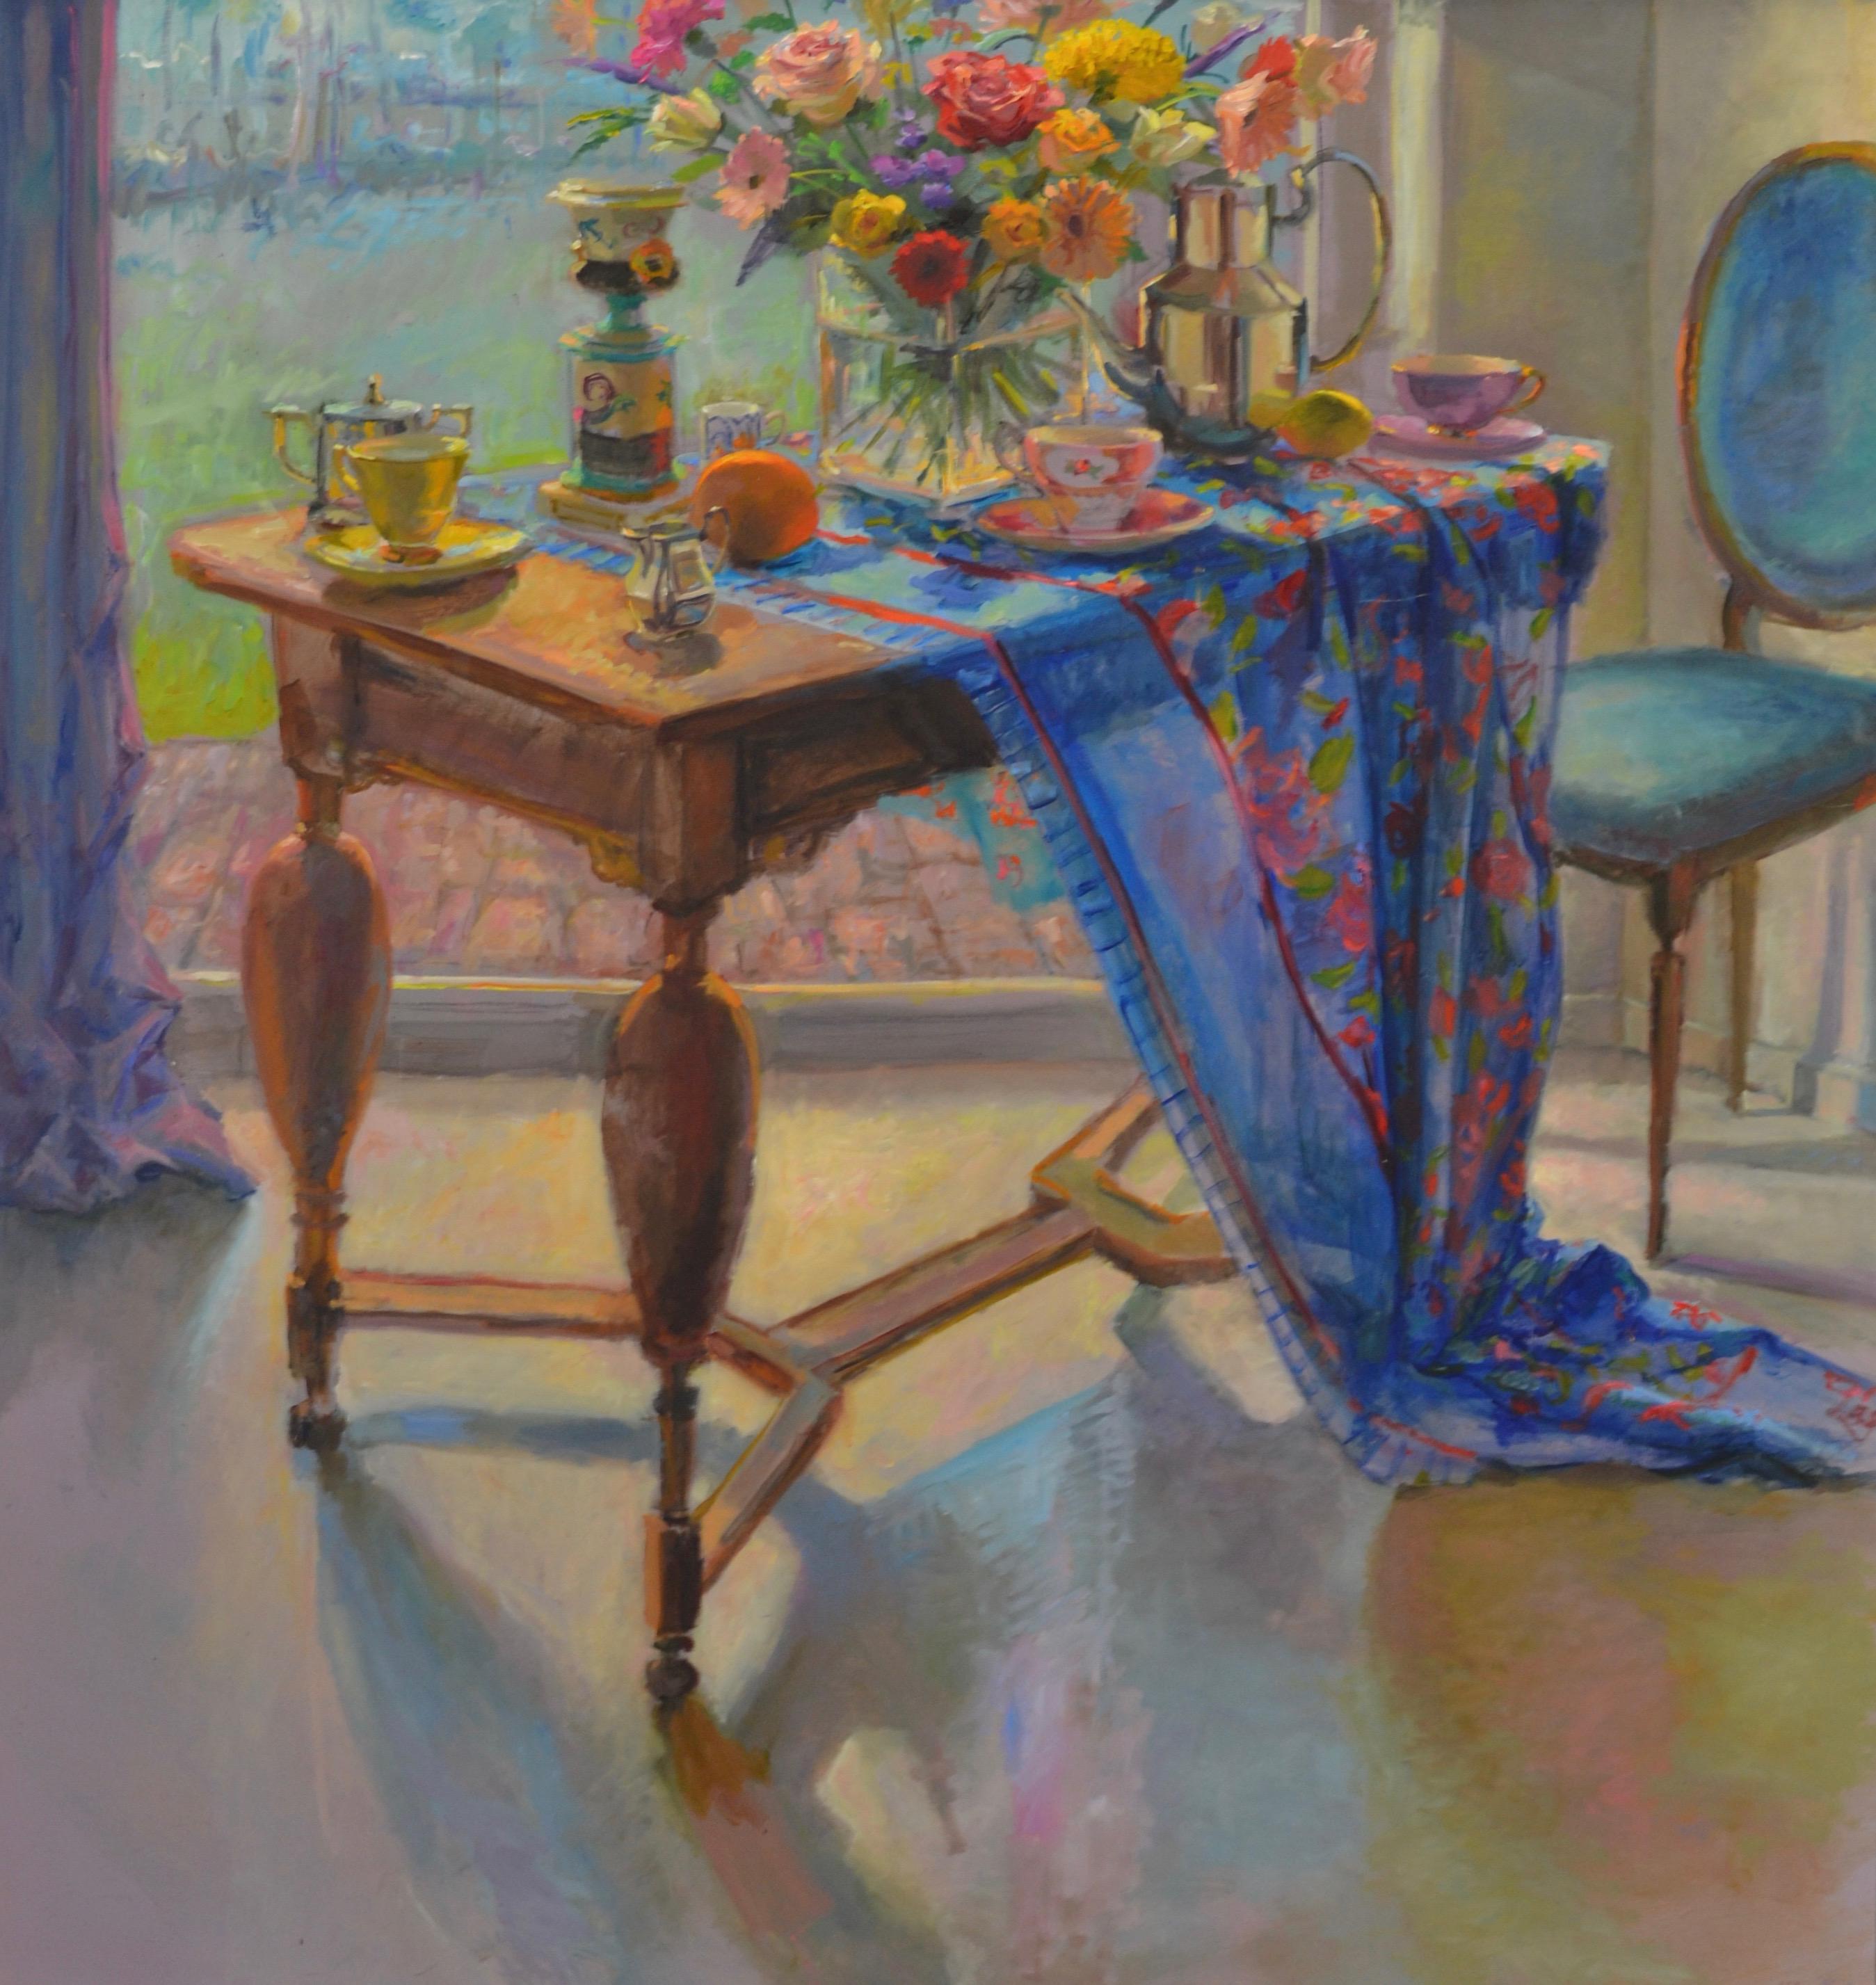 Table with blue Tablecloth on Summerday- 21st Century Contemporary Painting 